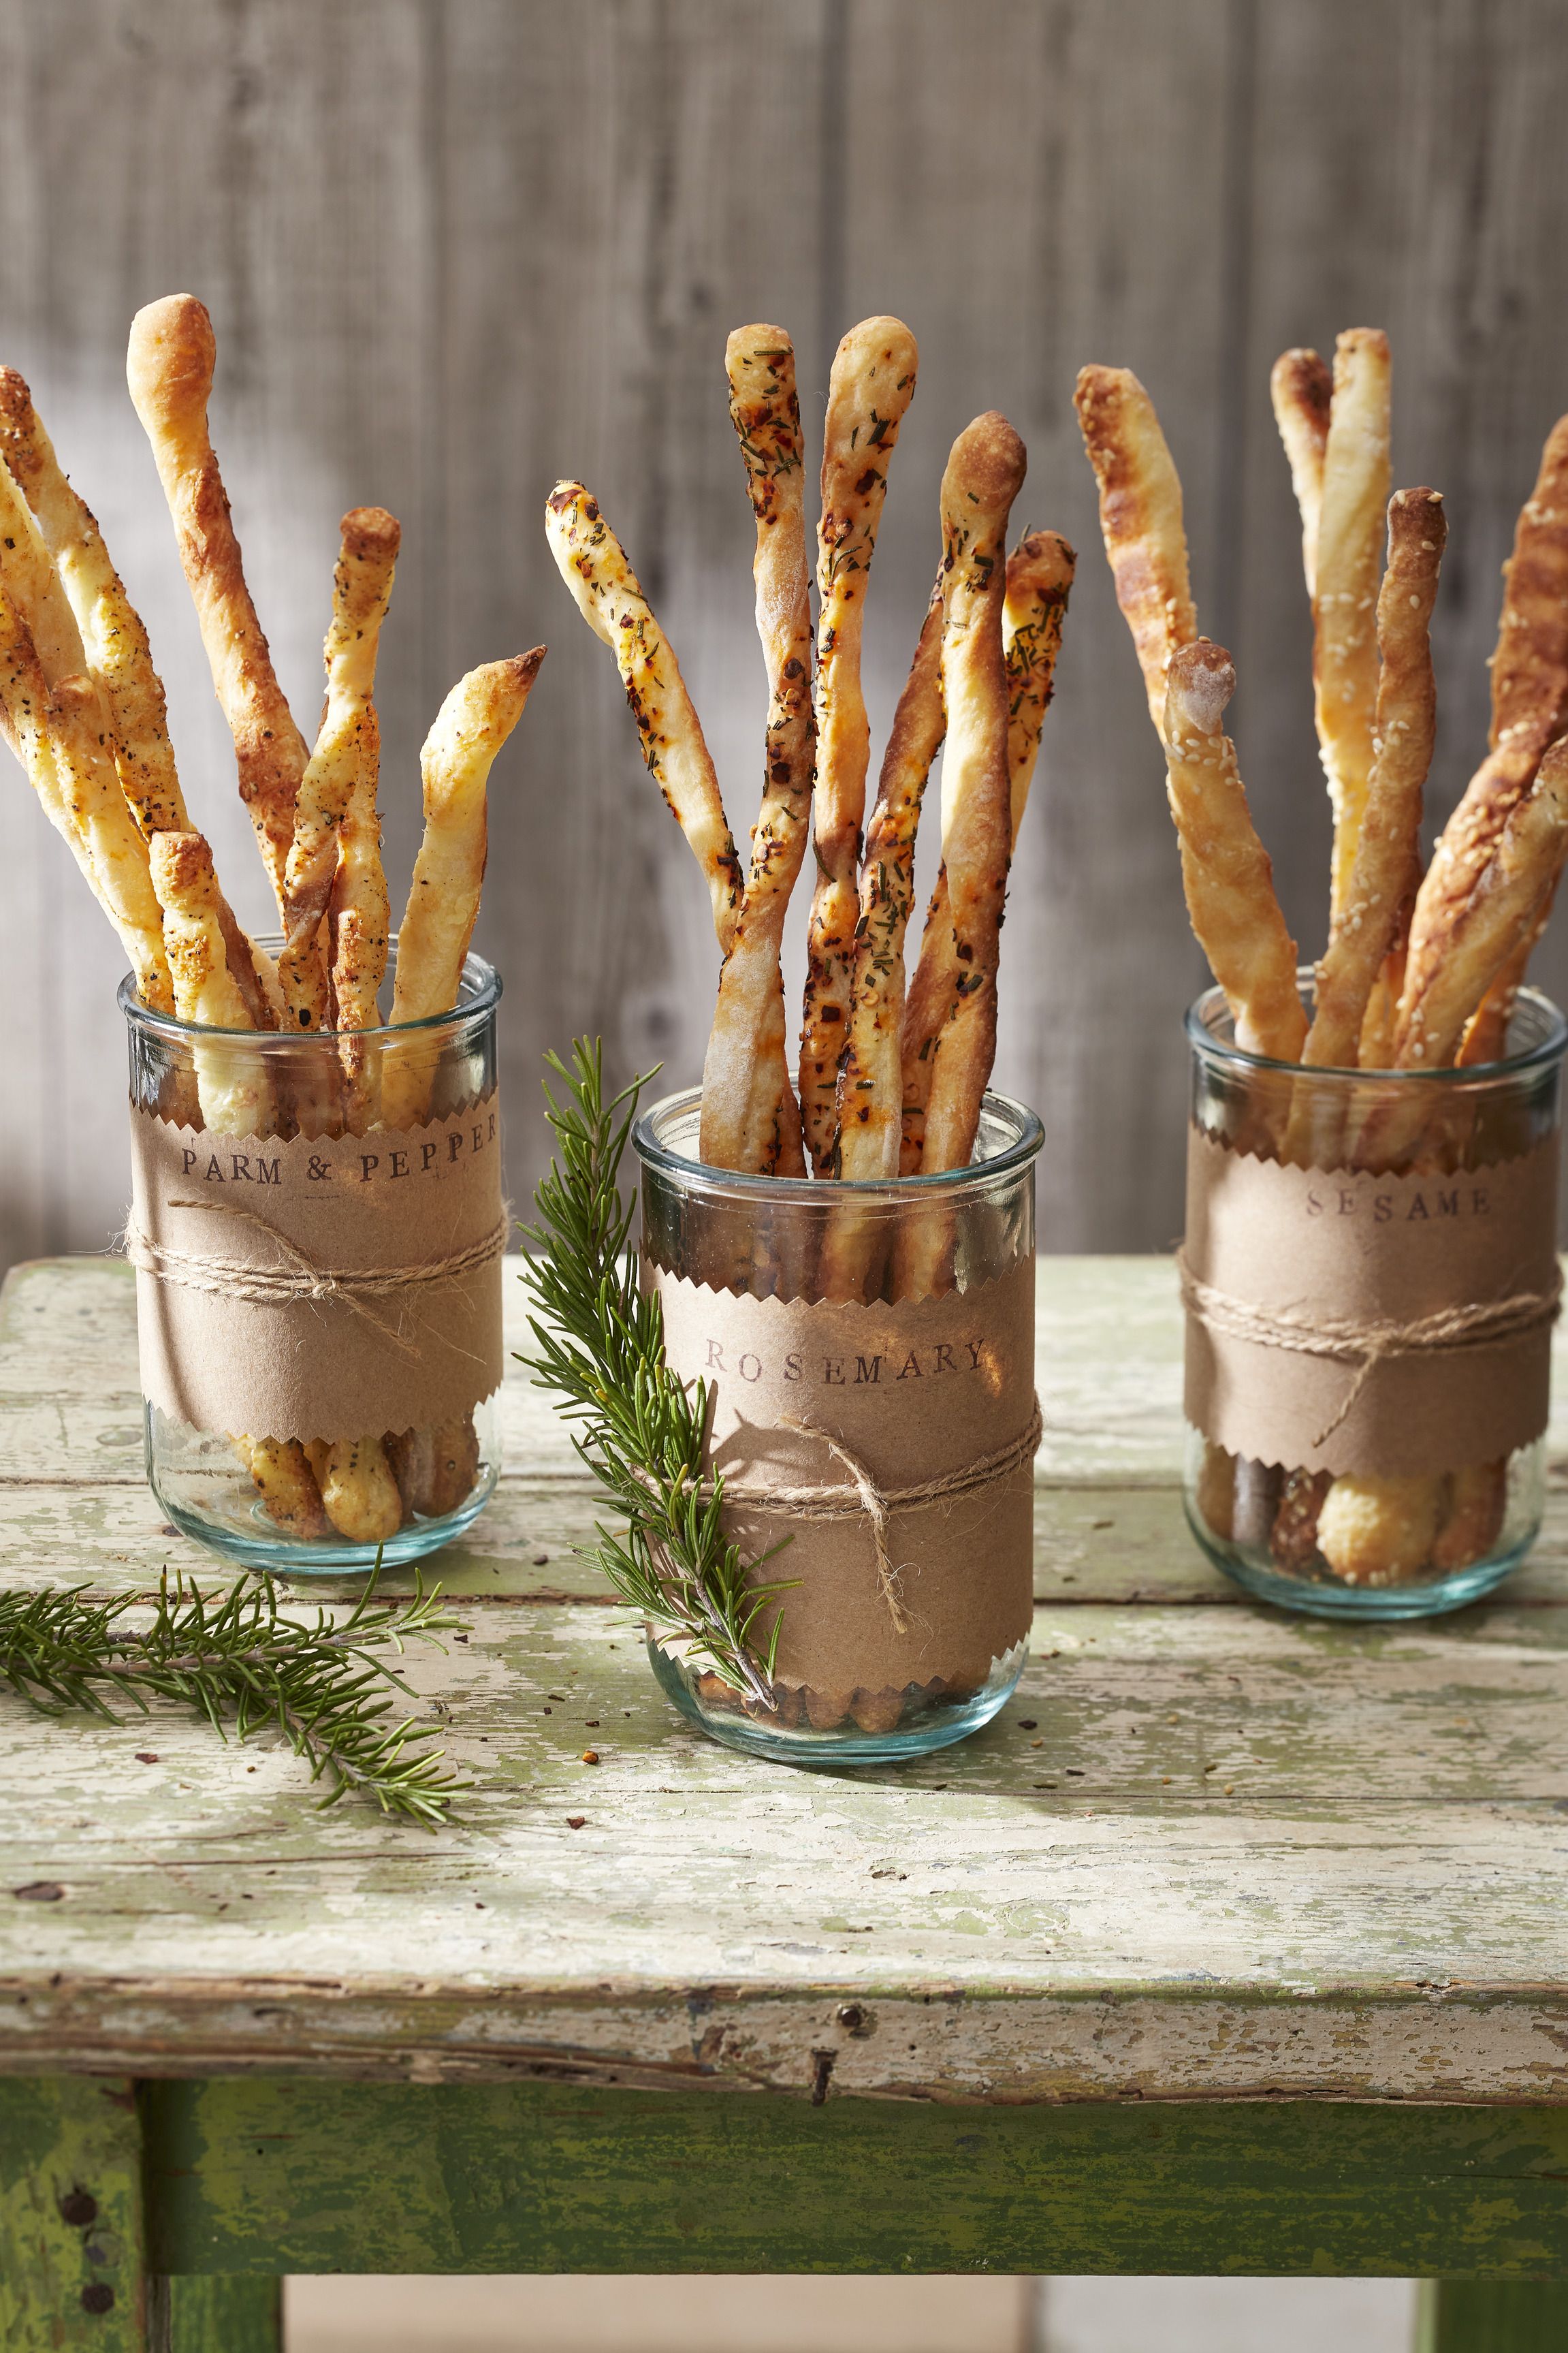 Grissini (Italian Toppings Breadsticks) with Three Recipe